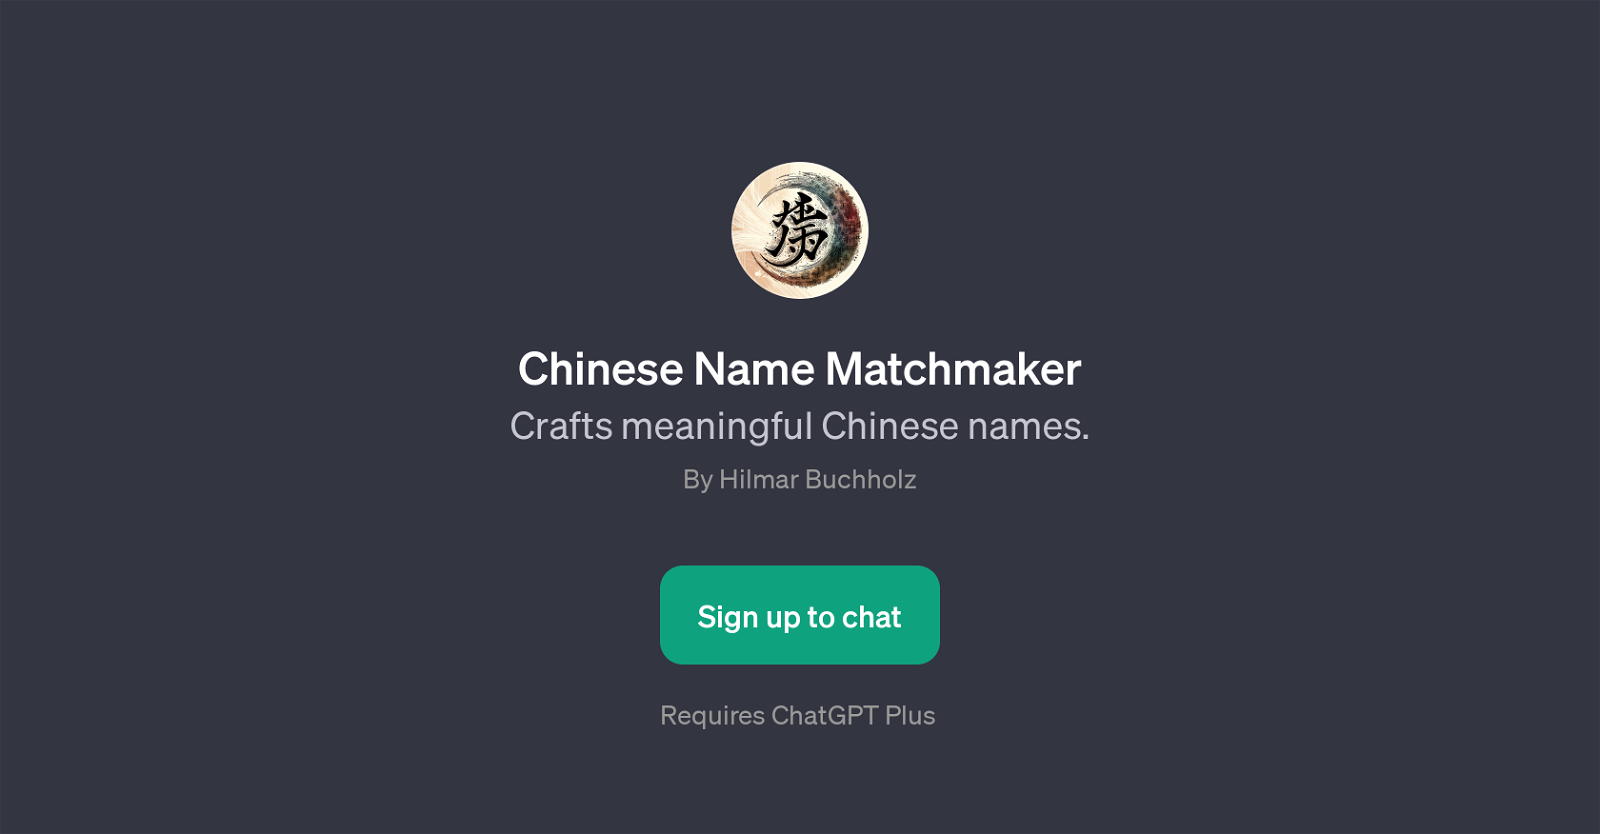 Chinese Name Matchmaker website